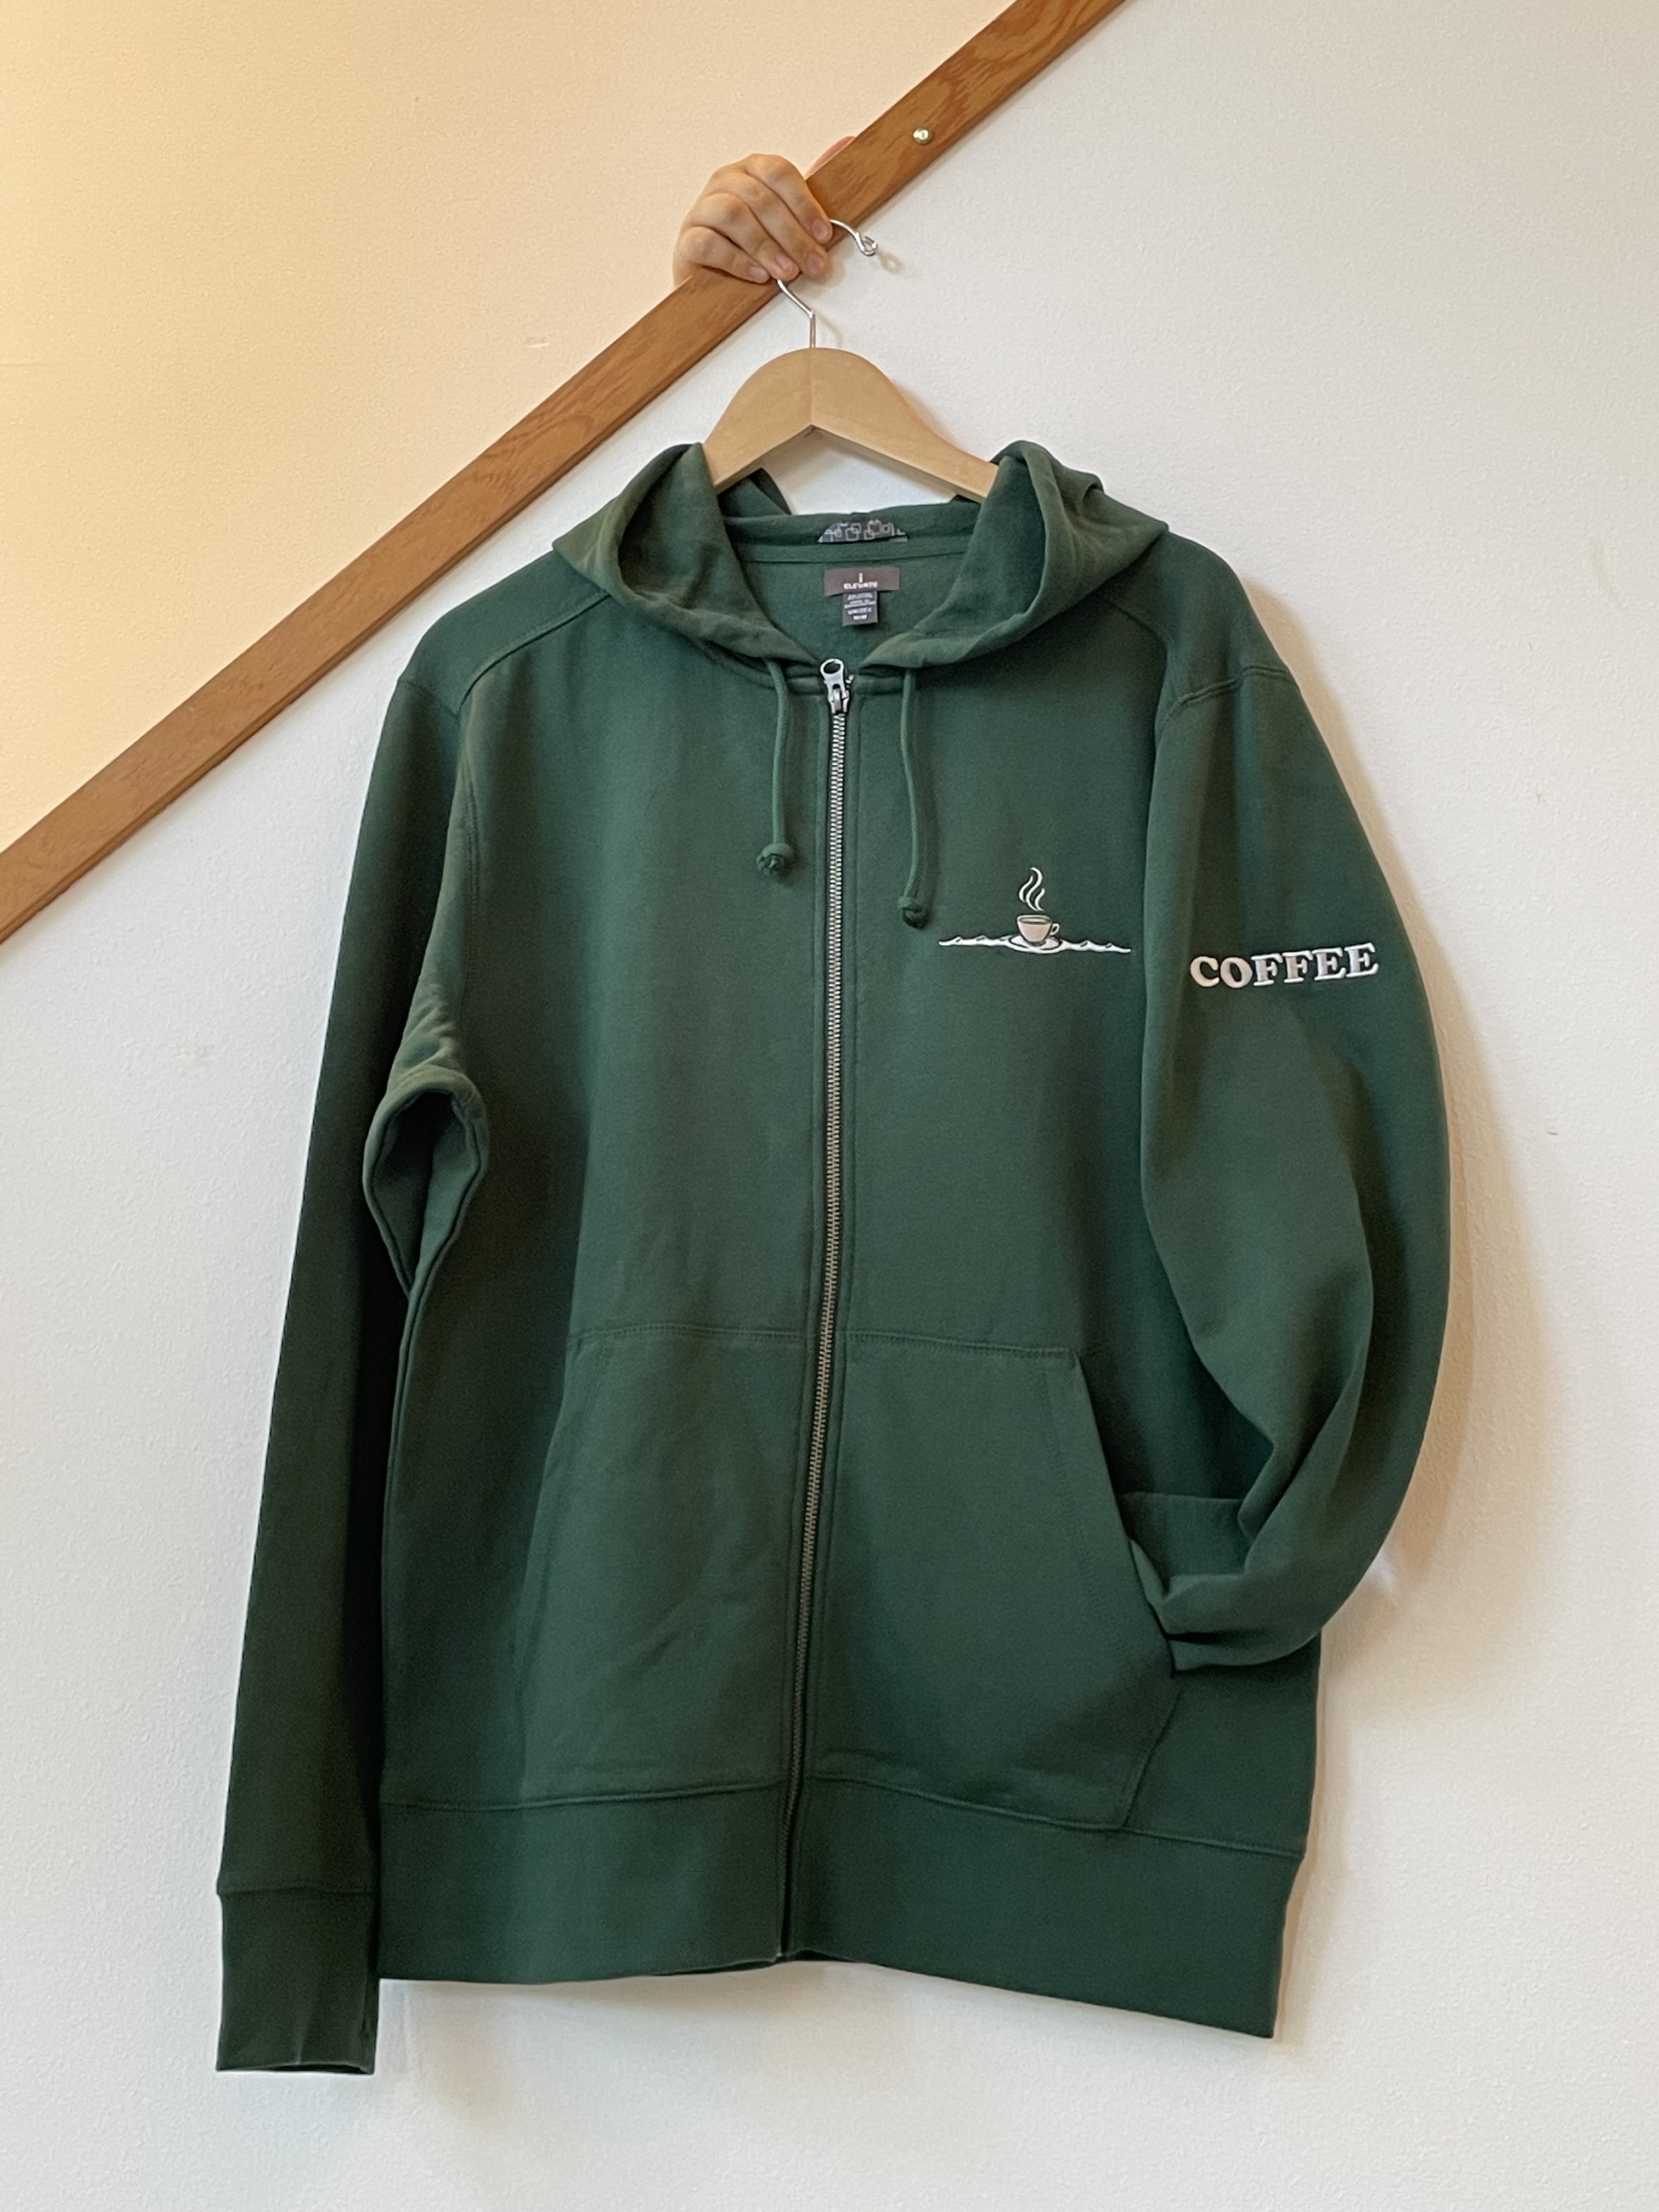 products/images/bltc_zipup_hoodie_green_silver.jpg